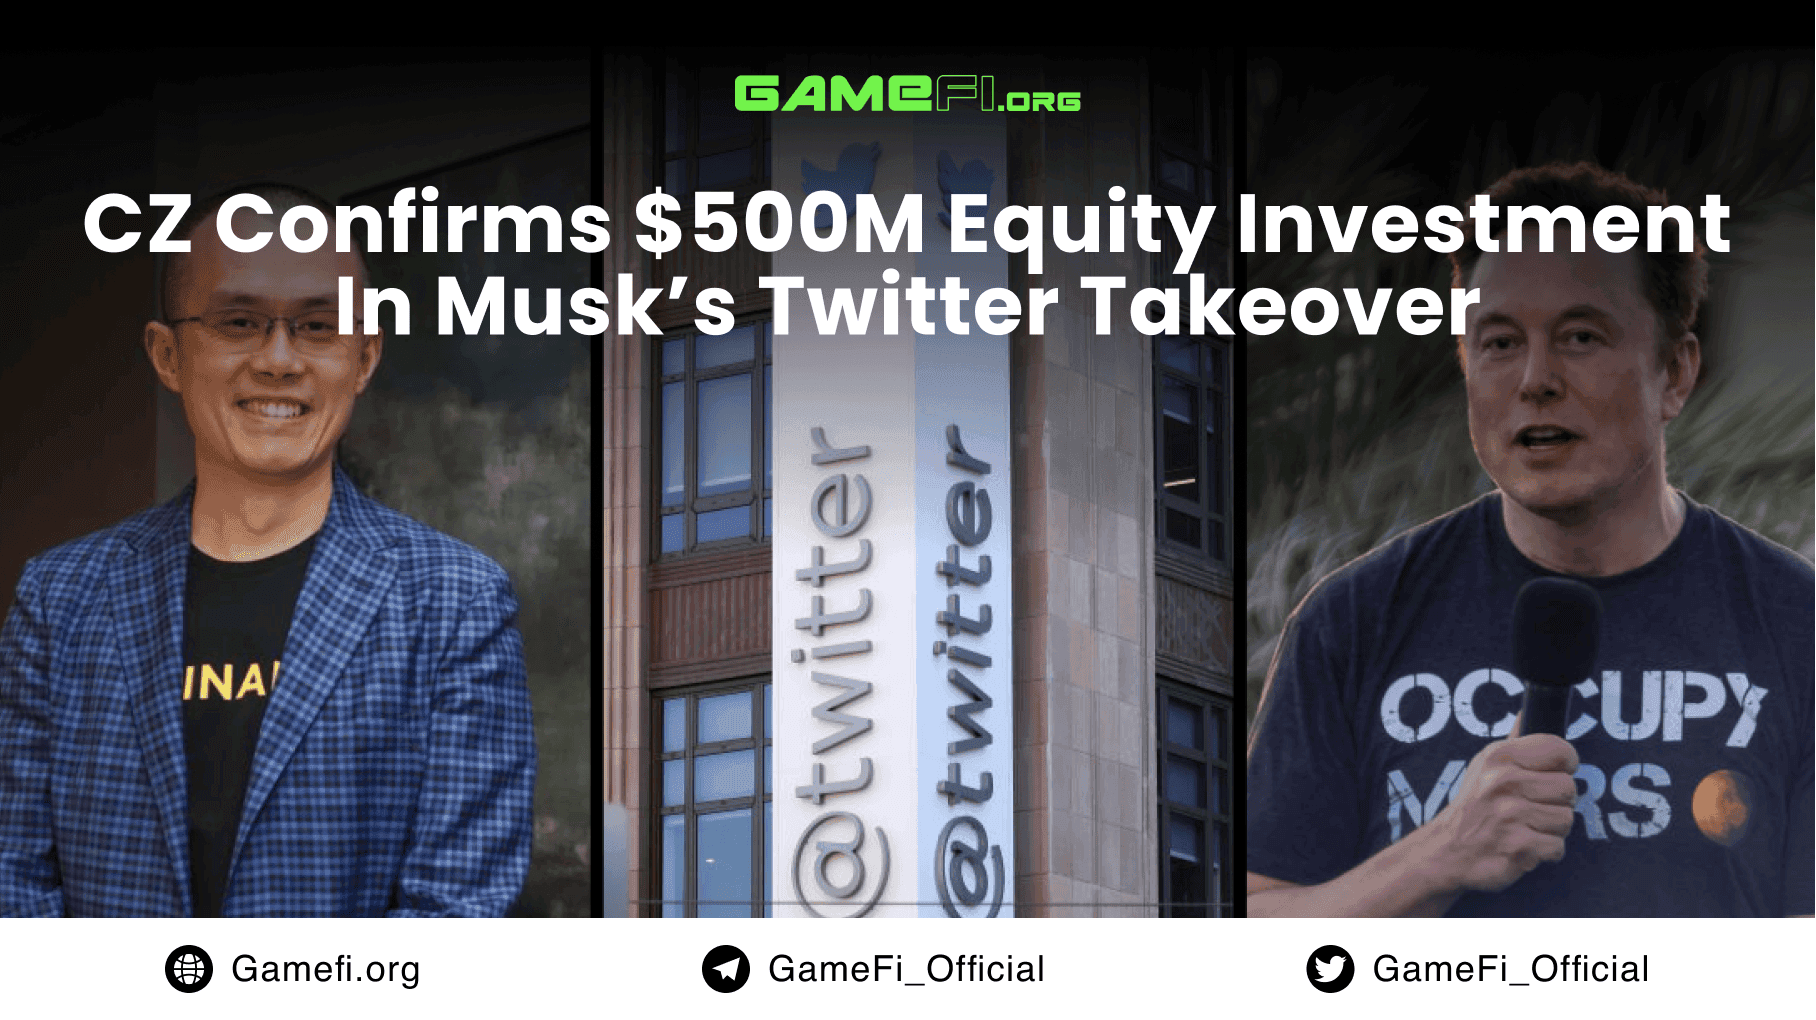 Binance's CEO CZ Confirms $500M Equity Investment To Back Musk’s Twitter Takeover